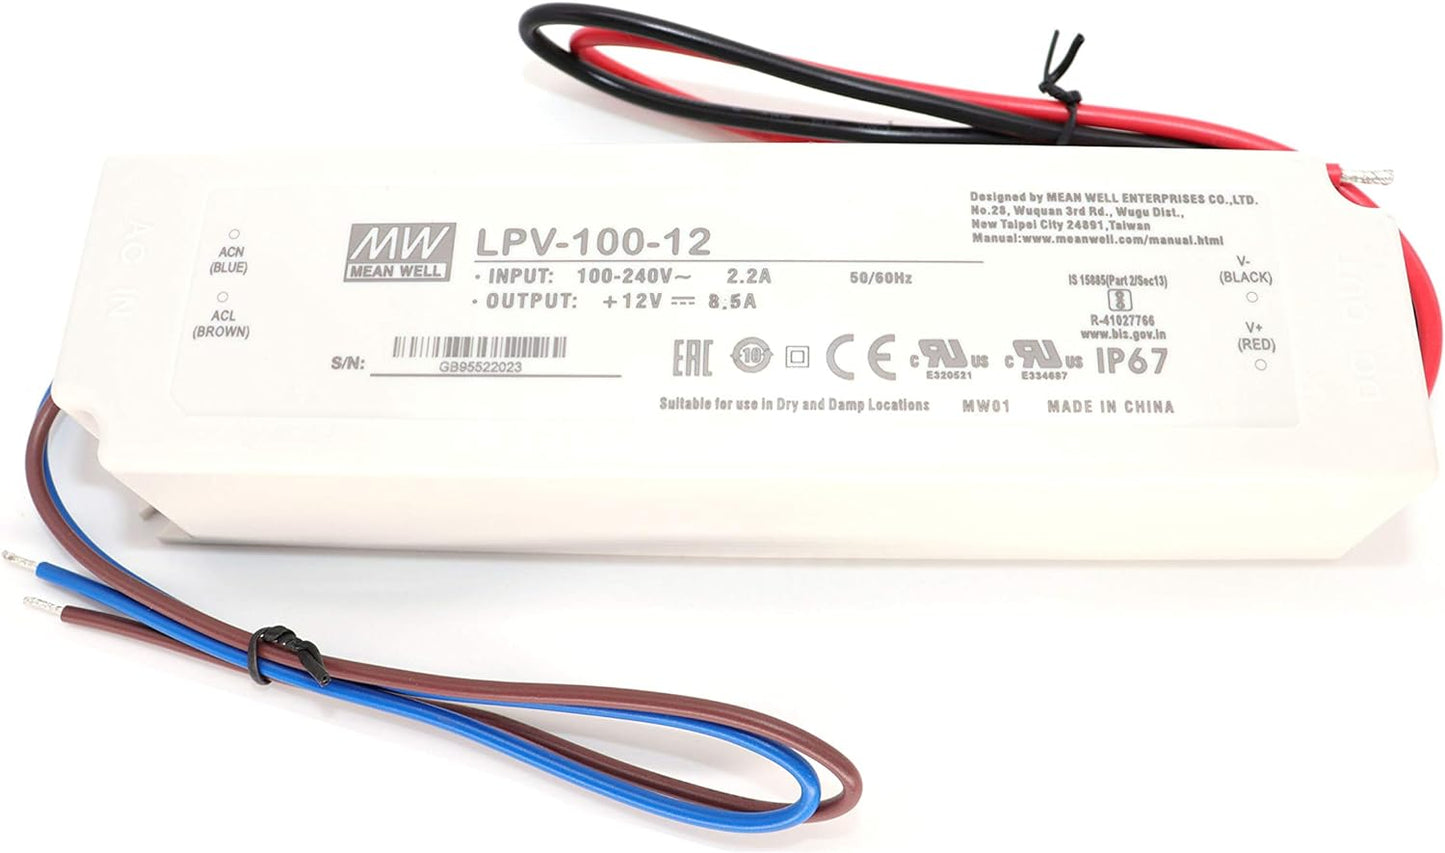 MEANWELL LPV-100-12 C.V Single Output Waterproof 100 Watt 8.5Amp 12VDC LED Driver IP67 for fixture or appliance